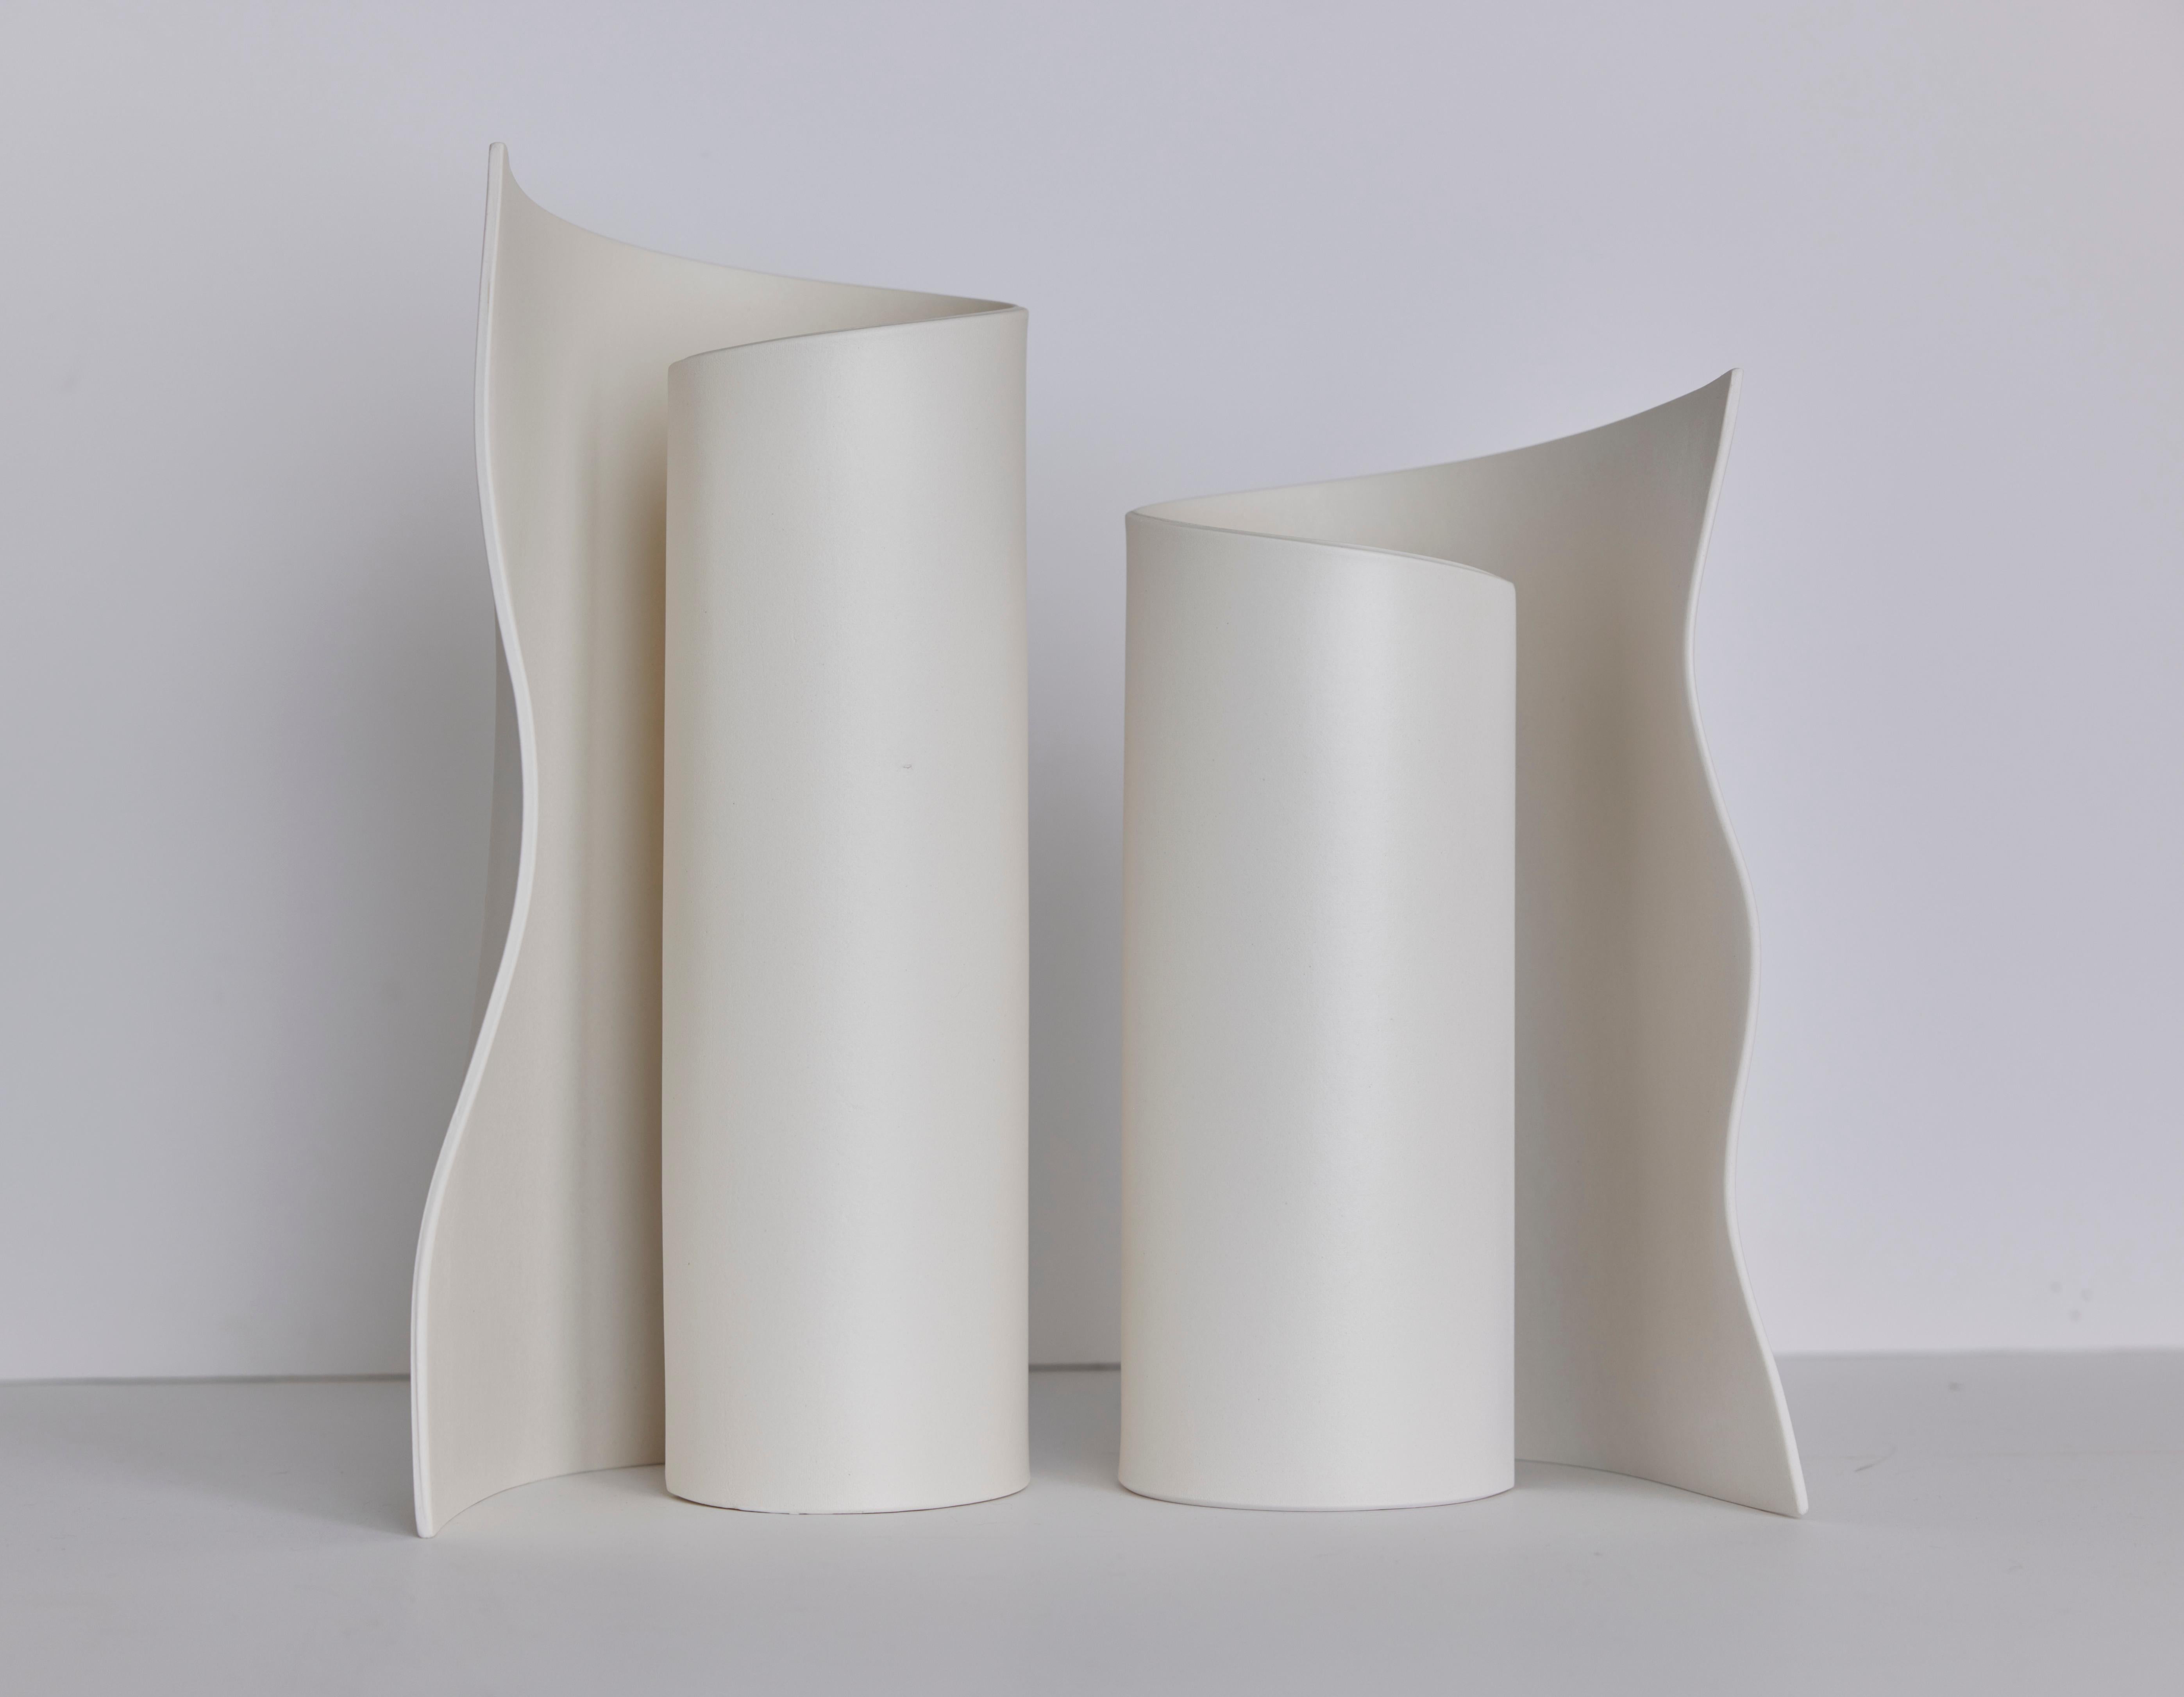 The Scroll Luminaires are Ceramic Table Lamps, made by Olivia Barry, by hand. The folded shape of the white earthenware wing hides the light source while allowing the ambient light to project onto the matte finished wing.

Custom dimensions